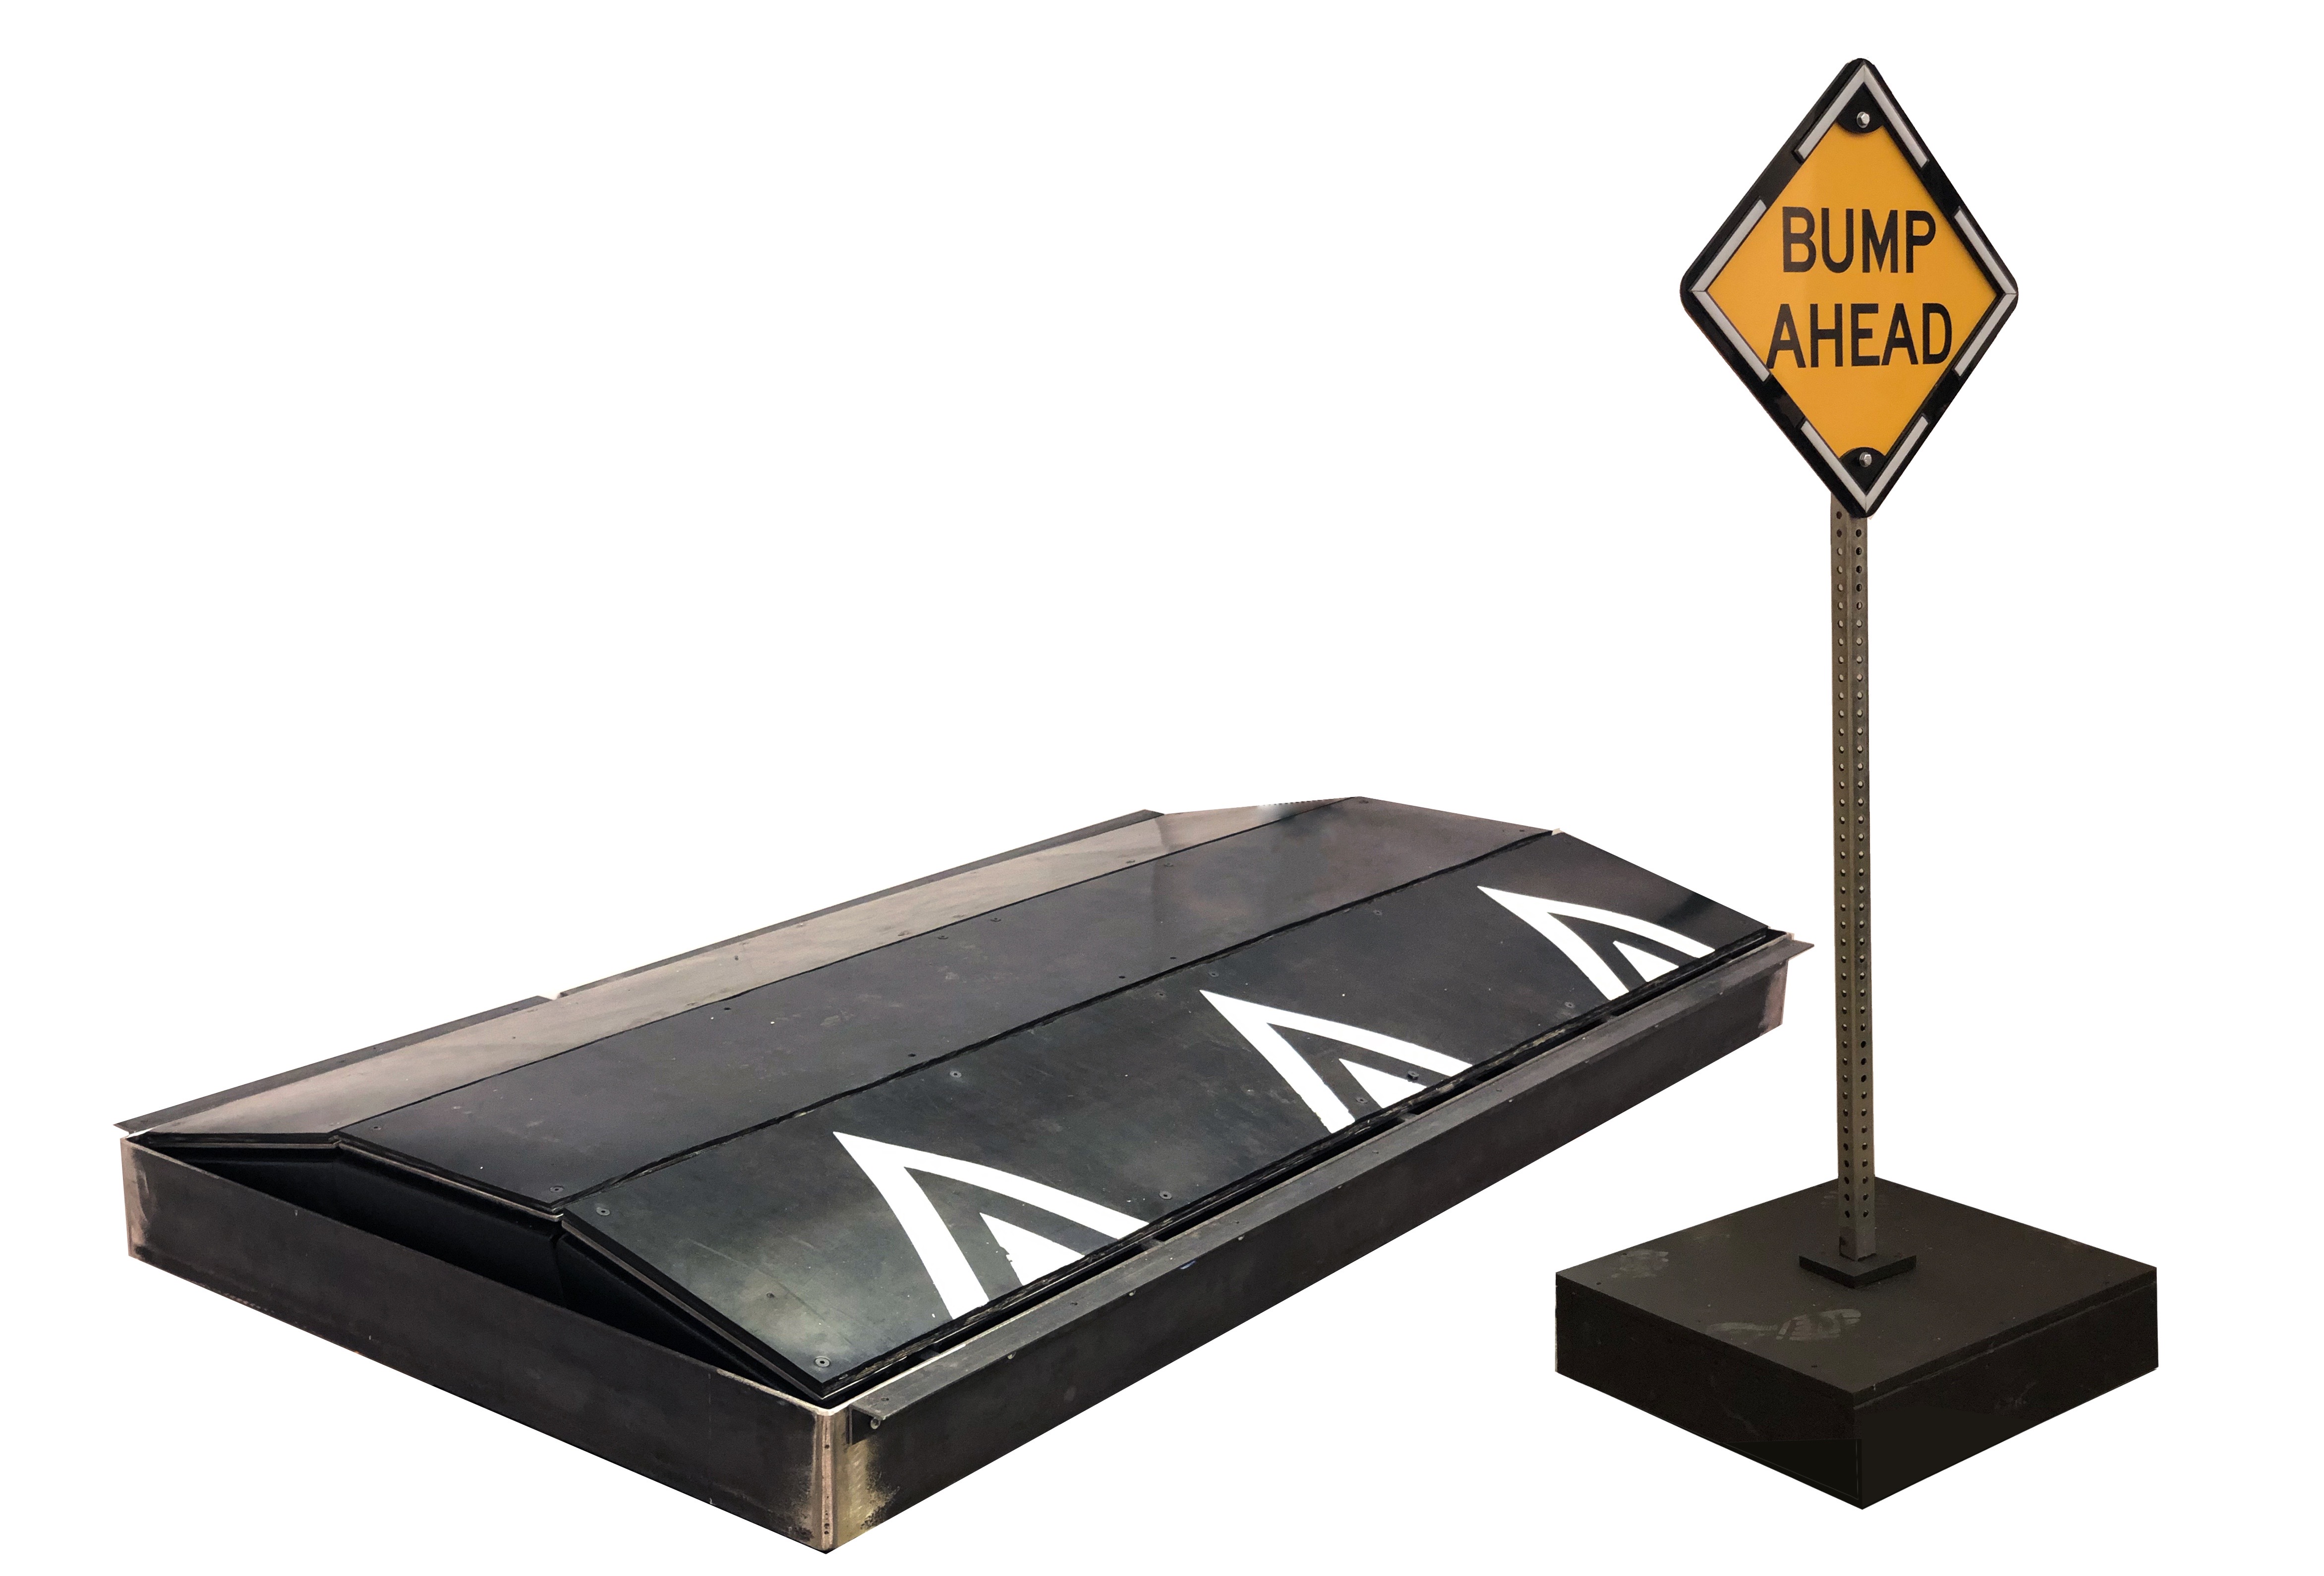 Product image of the entire speed bump including rubber cover with road markings and Bump Ahead sign with LEDs